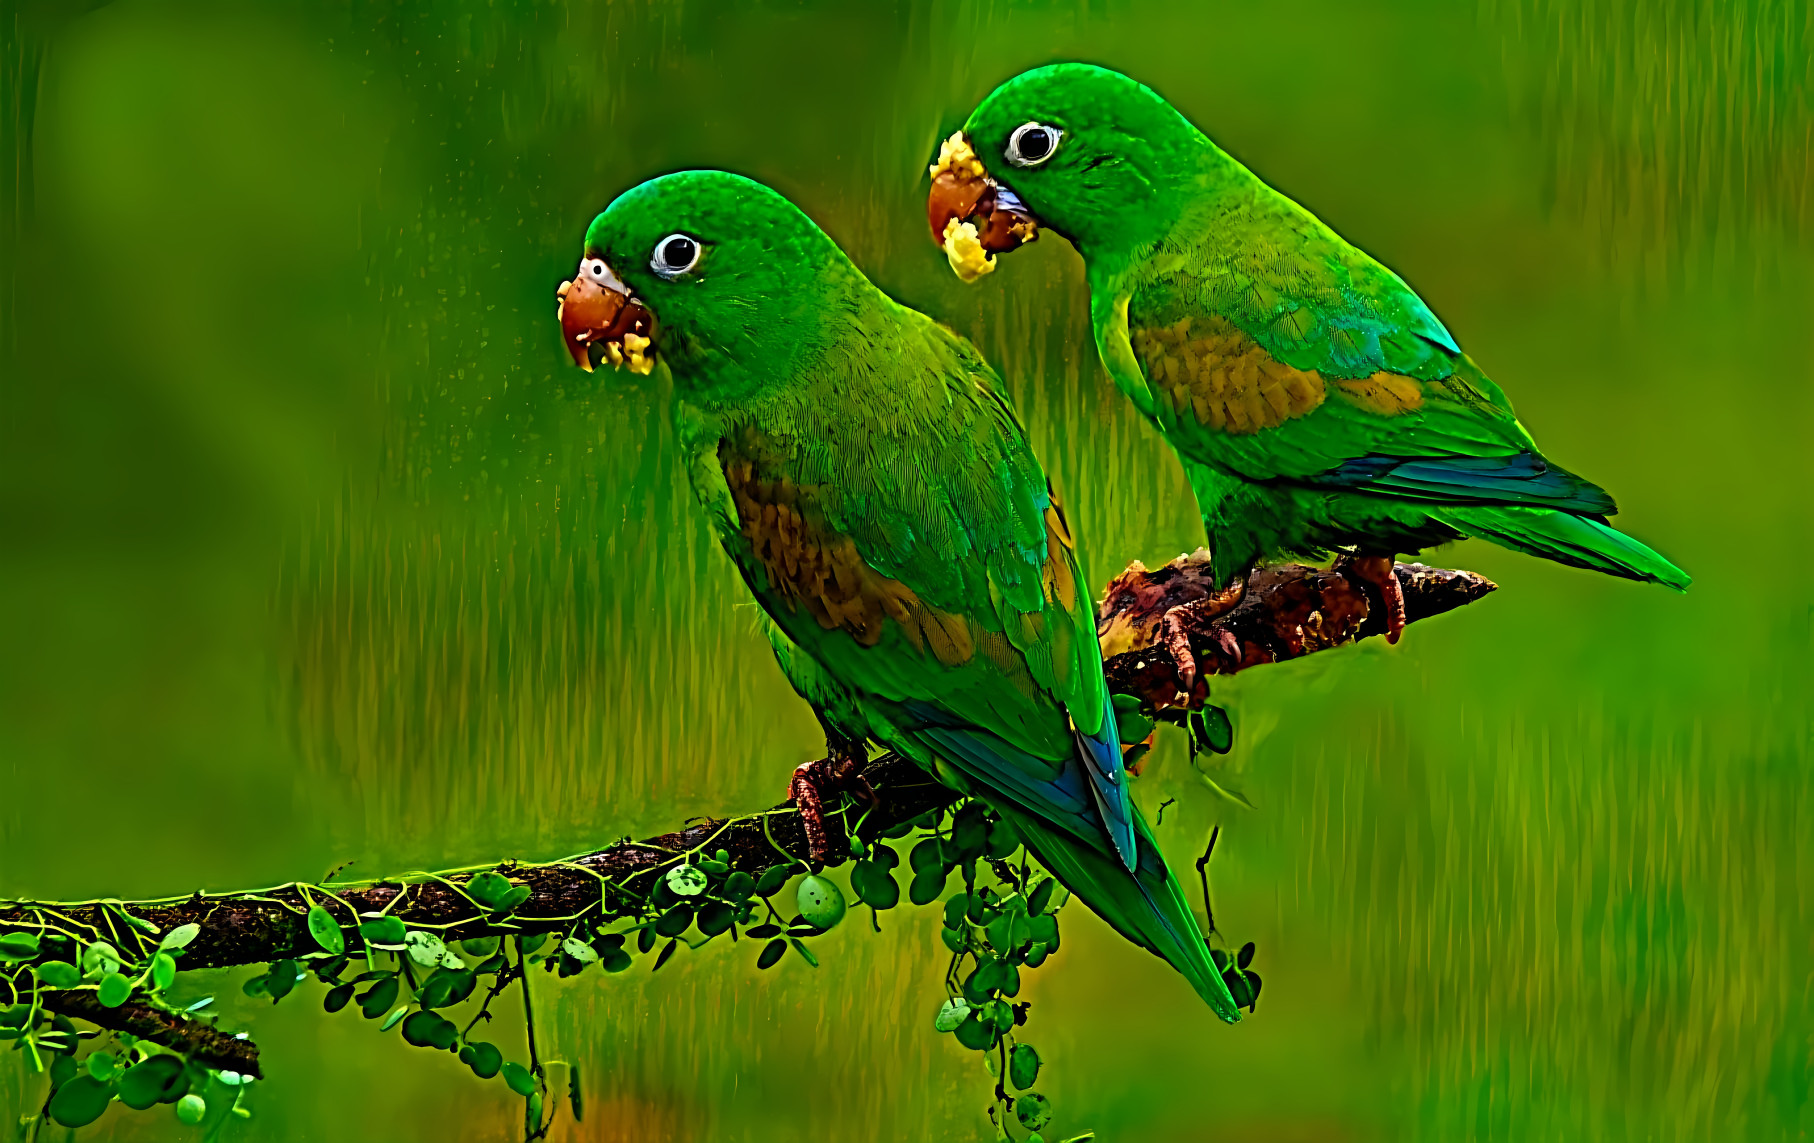 Two Green parrots